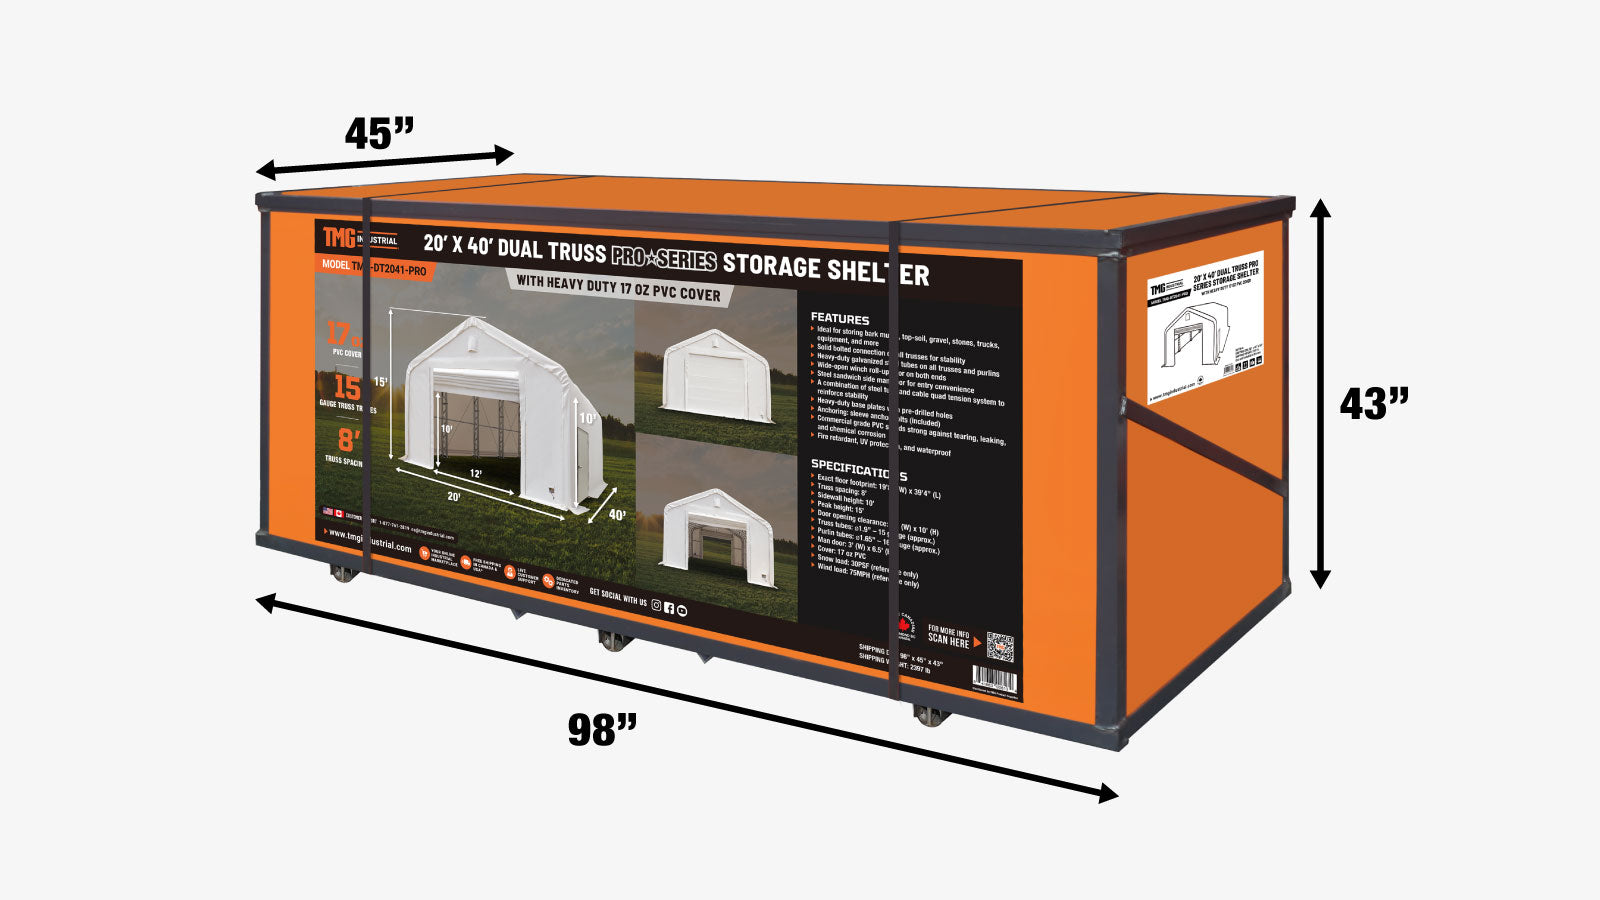 TMG Industrial Pro Series 20' x 40' Dual Truss Storage Shelter with Heavy Duty 17 oz PVC Cover & Drive Through Doors, TMG-DT2041-PRO-shipping-info-image